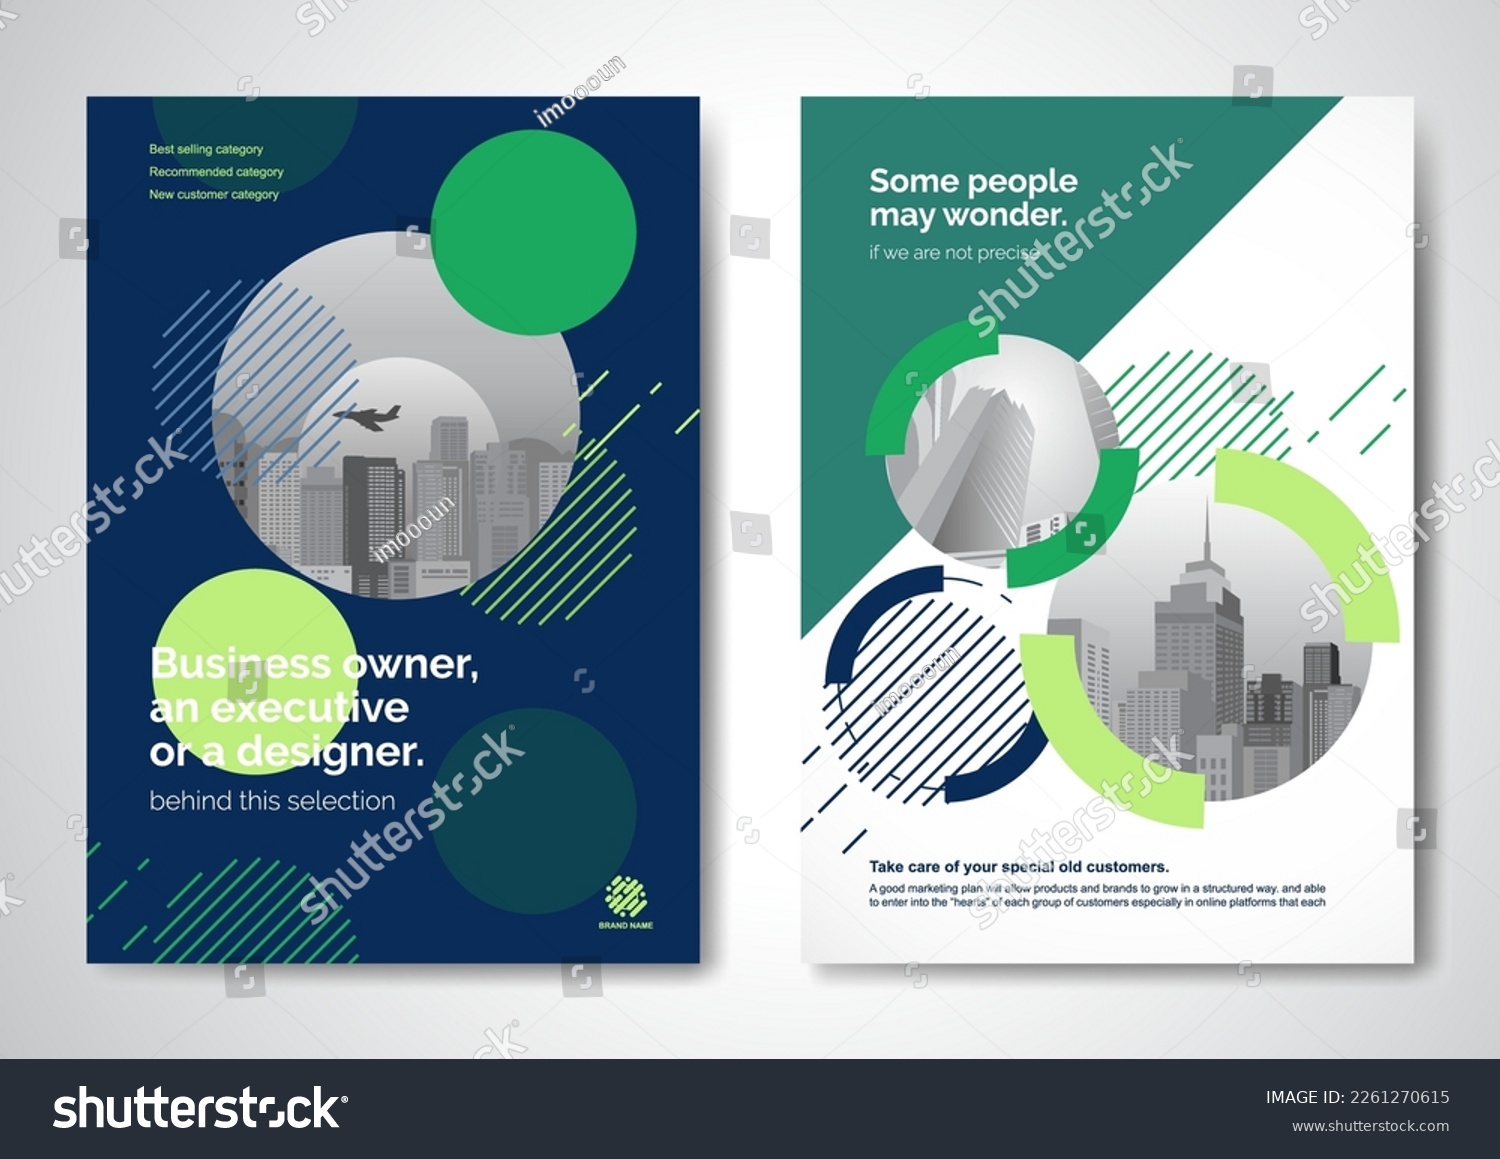 Template vector design for Brochure, AnnualReport, Magazine, Poster, Corporate Presentation, Portfolio, Flyer, infographic, layout modern with blue color size A4, Front and back, Easy to use and edit. #2261270615